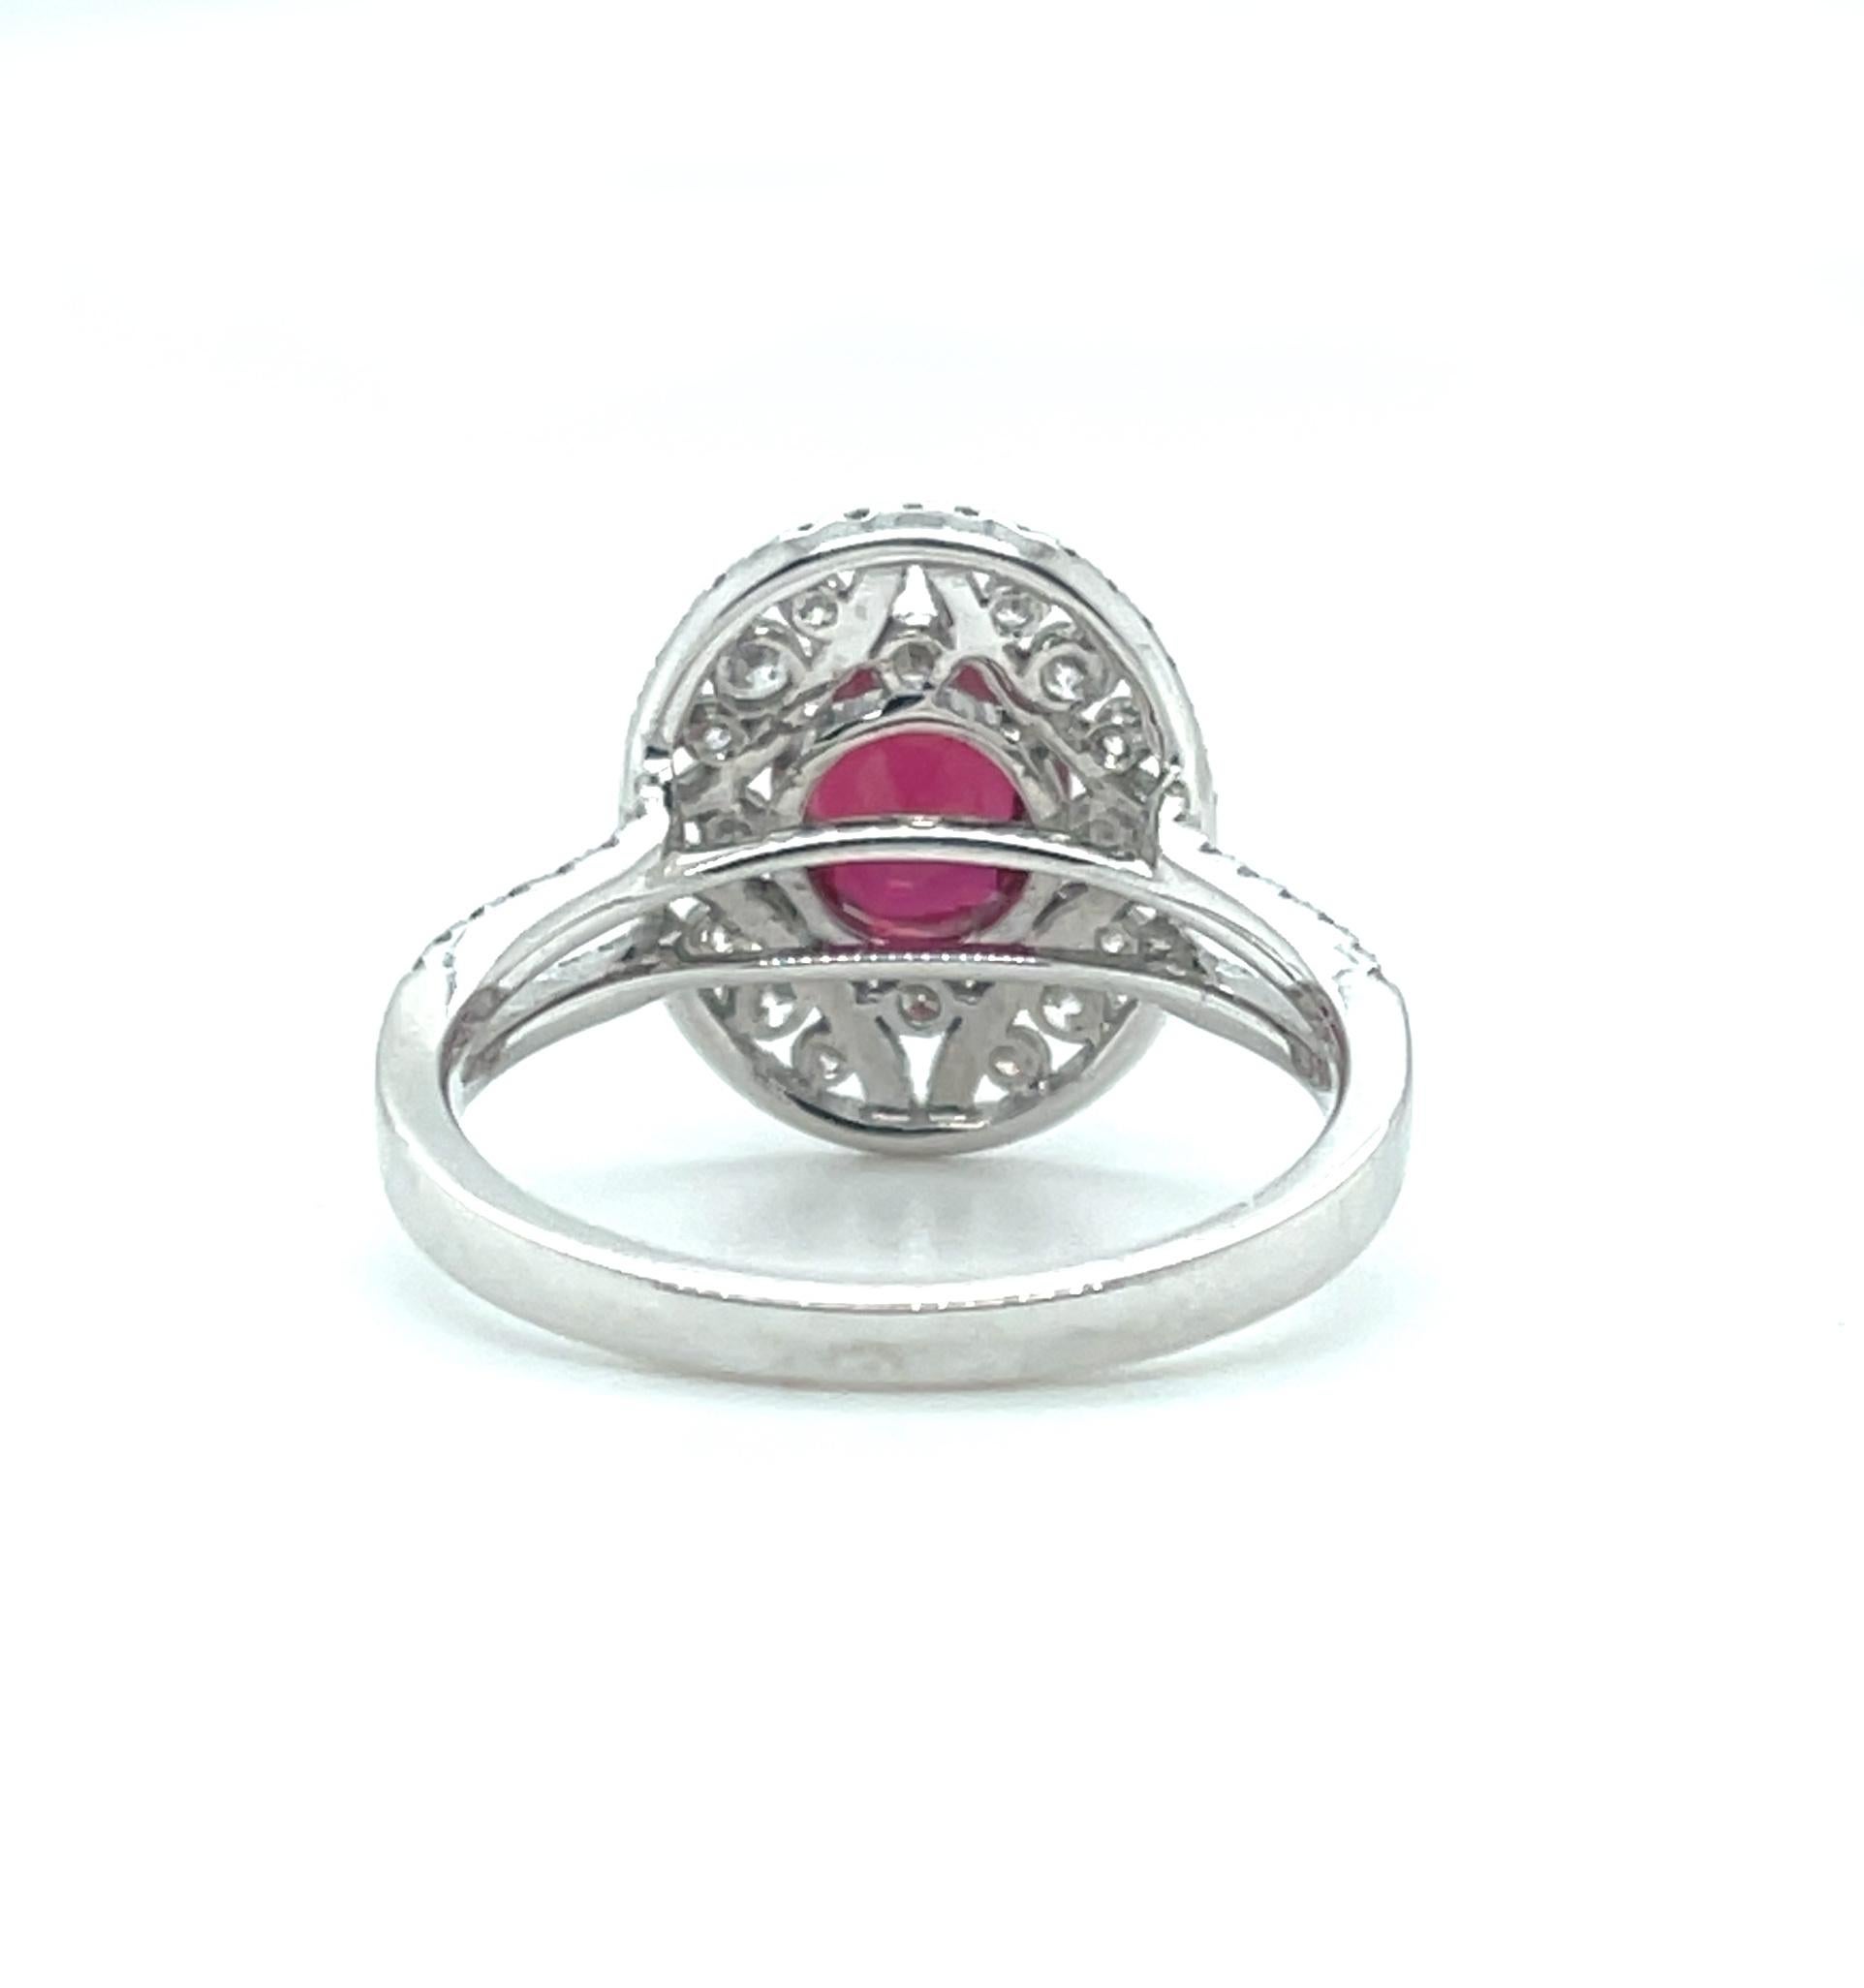 GIA Certified 1.57 Carat Ruby and Diamond Edwardian Inspired Cocktail Ring  For Sale 1